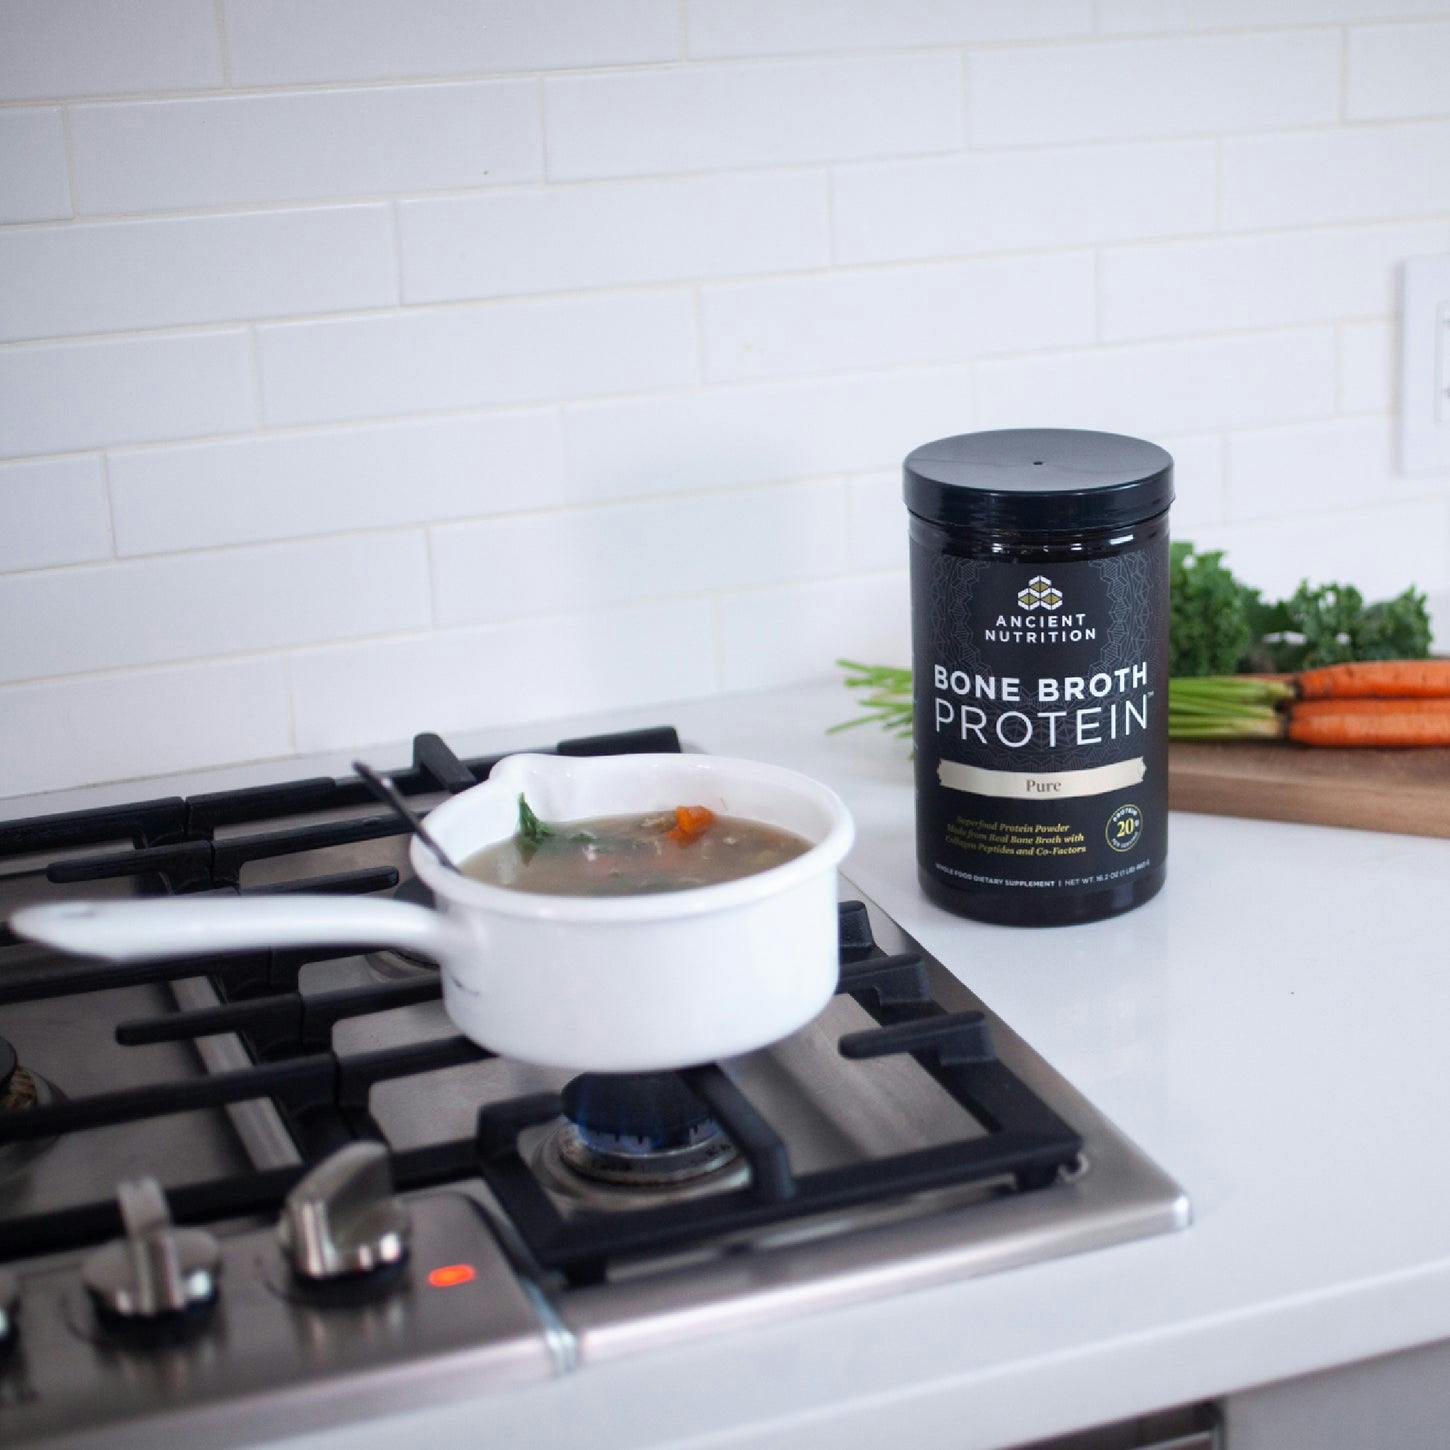 soup on the stove next to a bottle of bone broth protein pure 